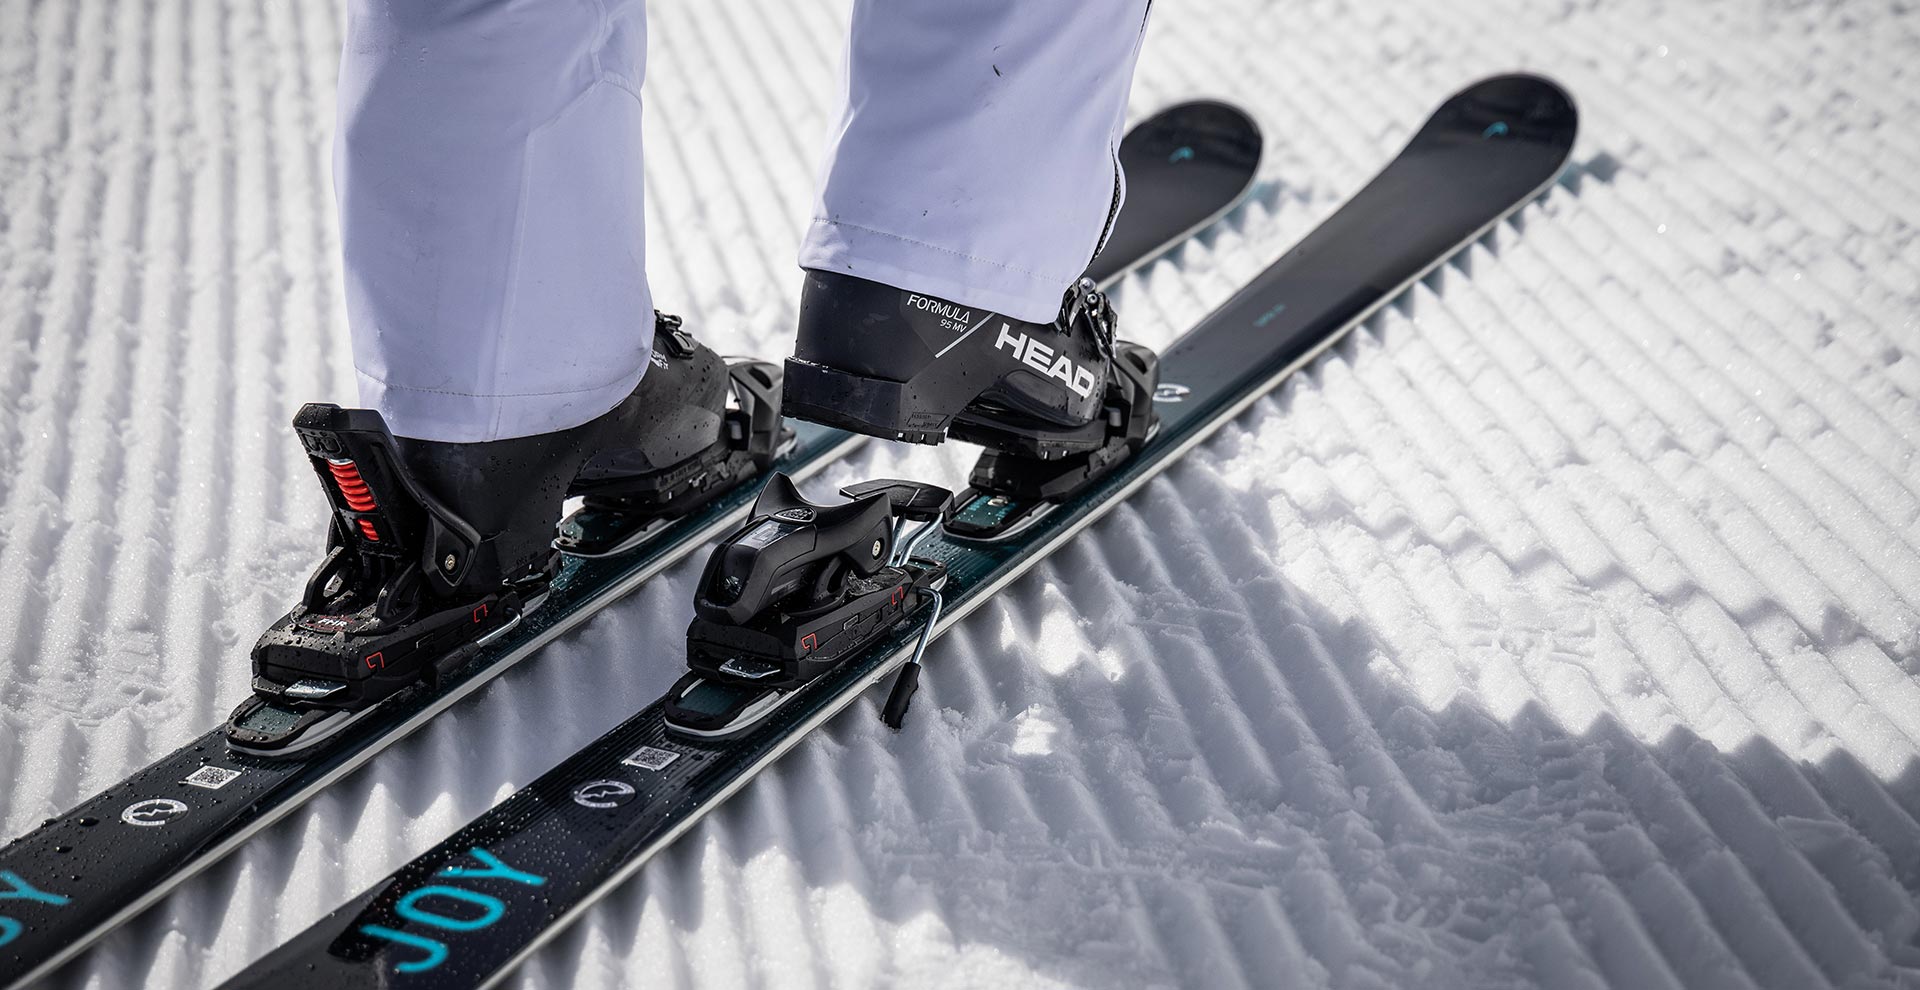 How to choose a back protector for skis racing